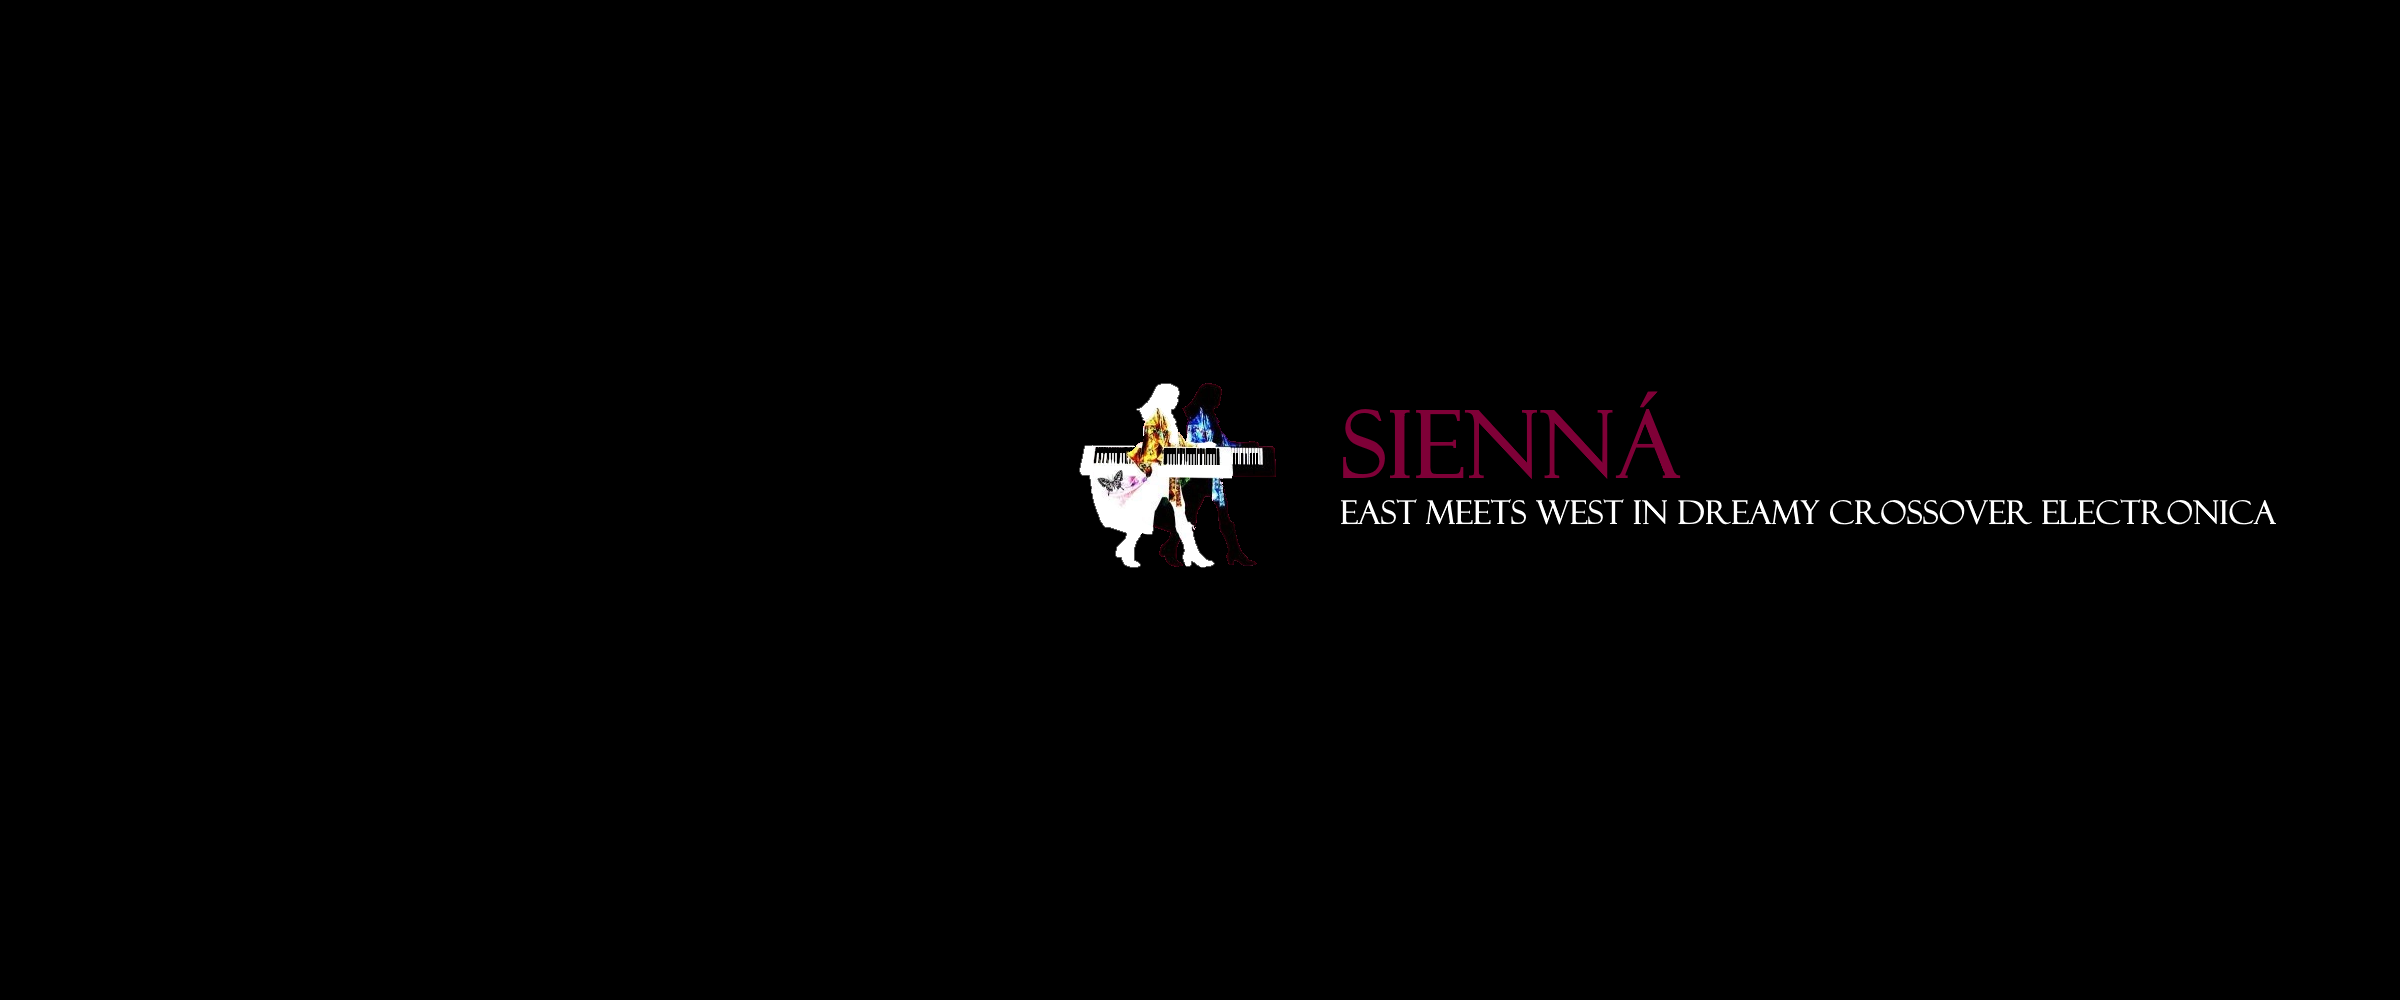 SIENNÁ East meets west in dreamy crossover electronica